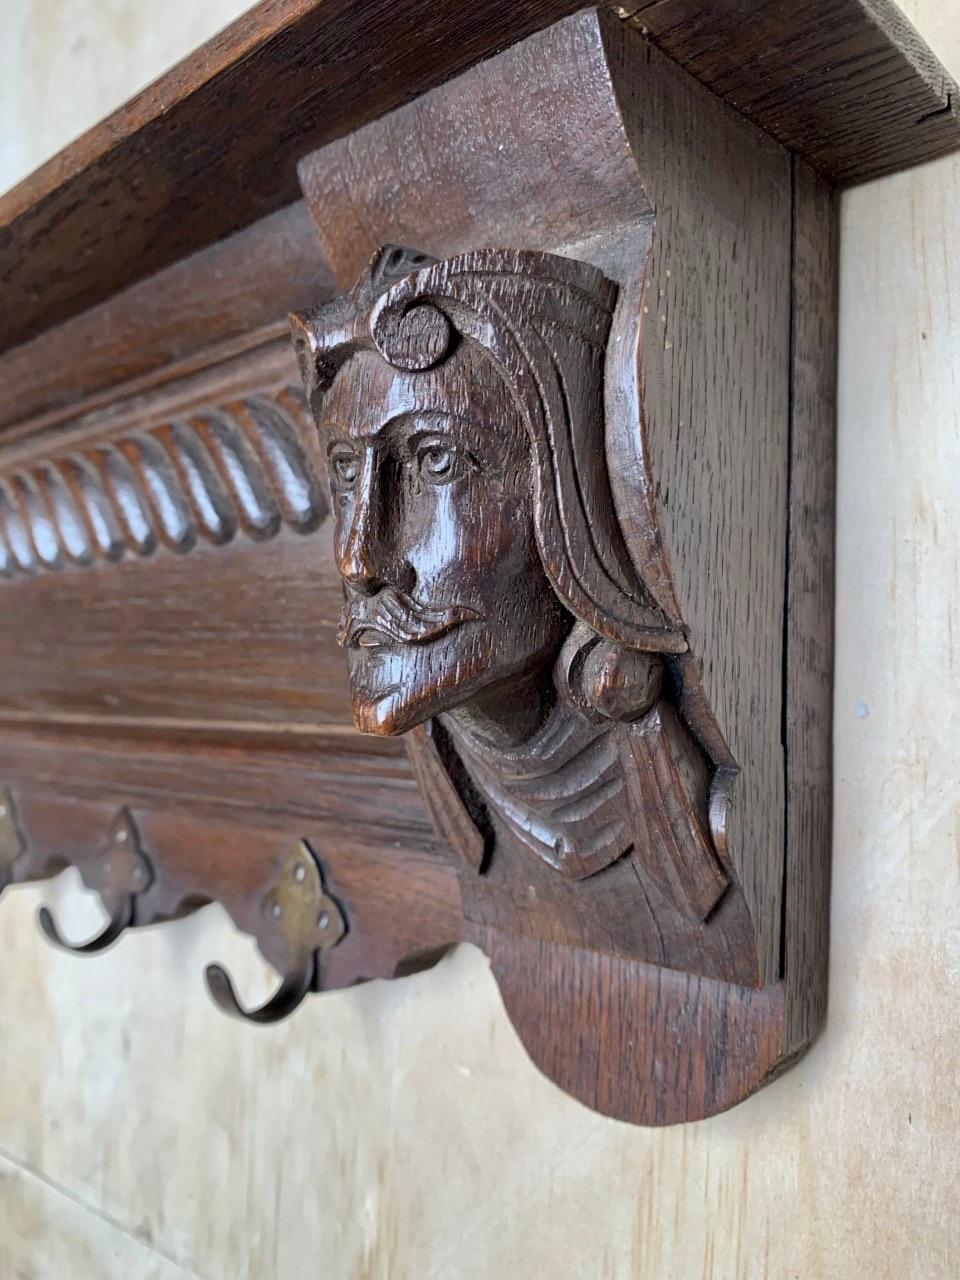 Small Early 1900s Renaissance Revival Wall Coat Rack with Carved Mask Sculptures For Sale 5